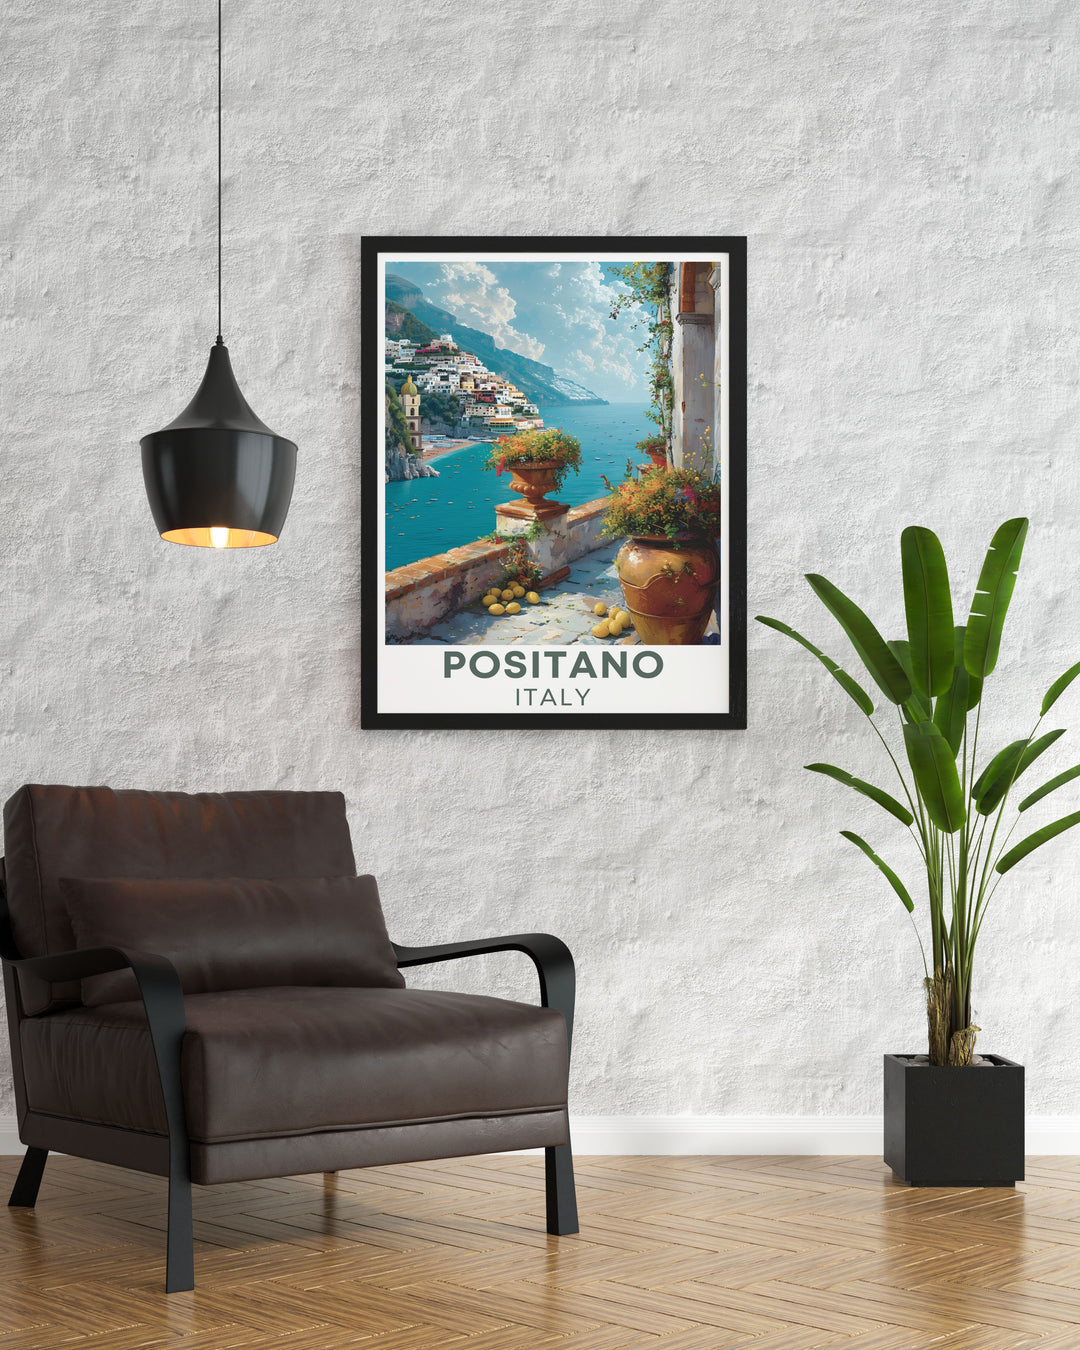 Beautiful Via Positanesi d America Travel poster showcasing the iconic Positano streets with colorful Mediterranean landscapes an ideal addition to any wall art collection perfect for adding charm and warmth to home decor and a lovely reminder of the Amalfi Coast